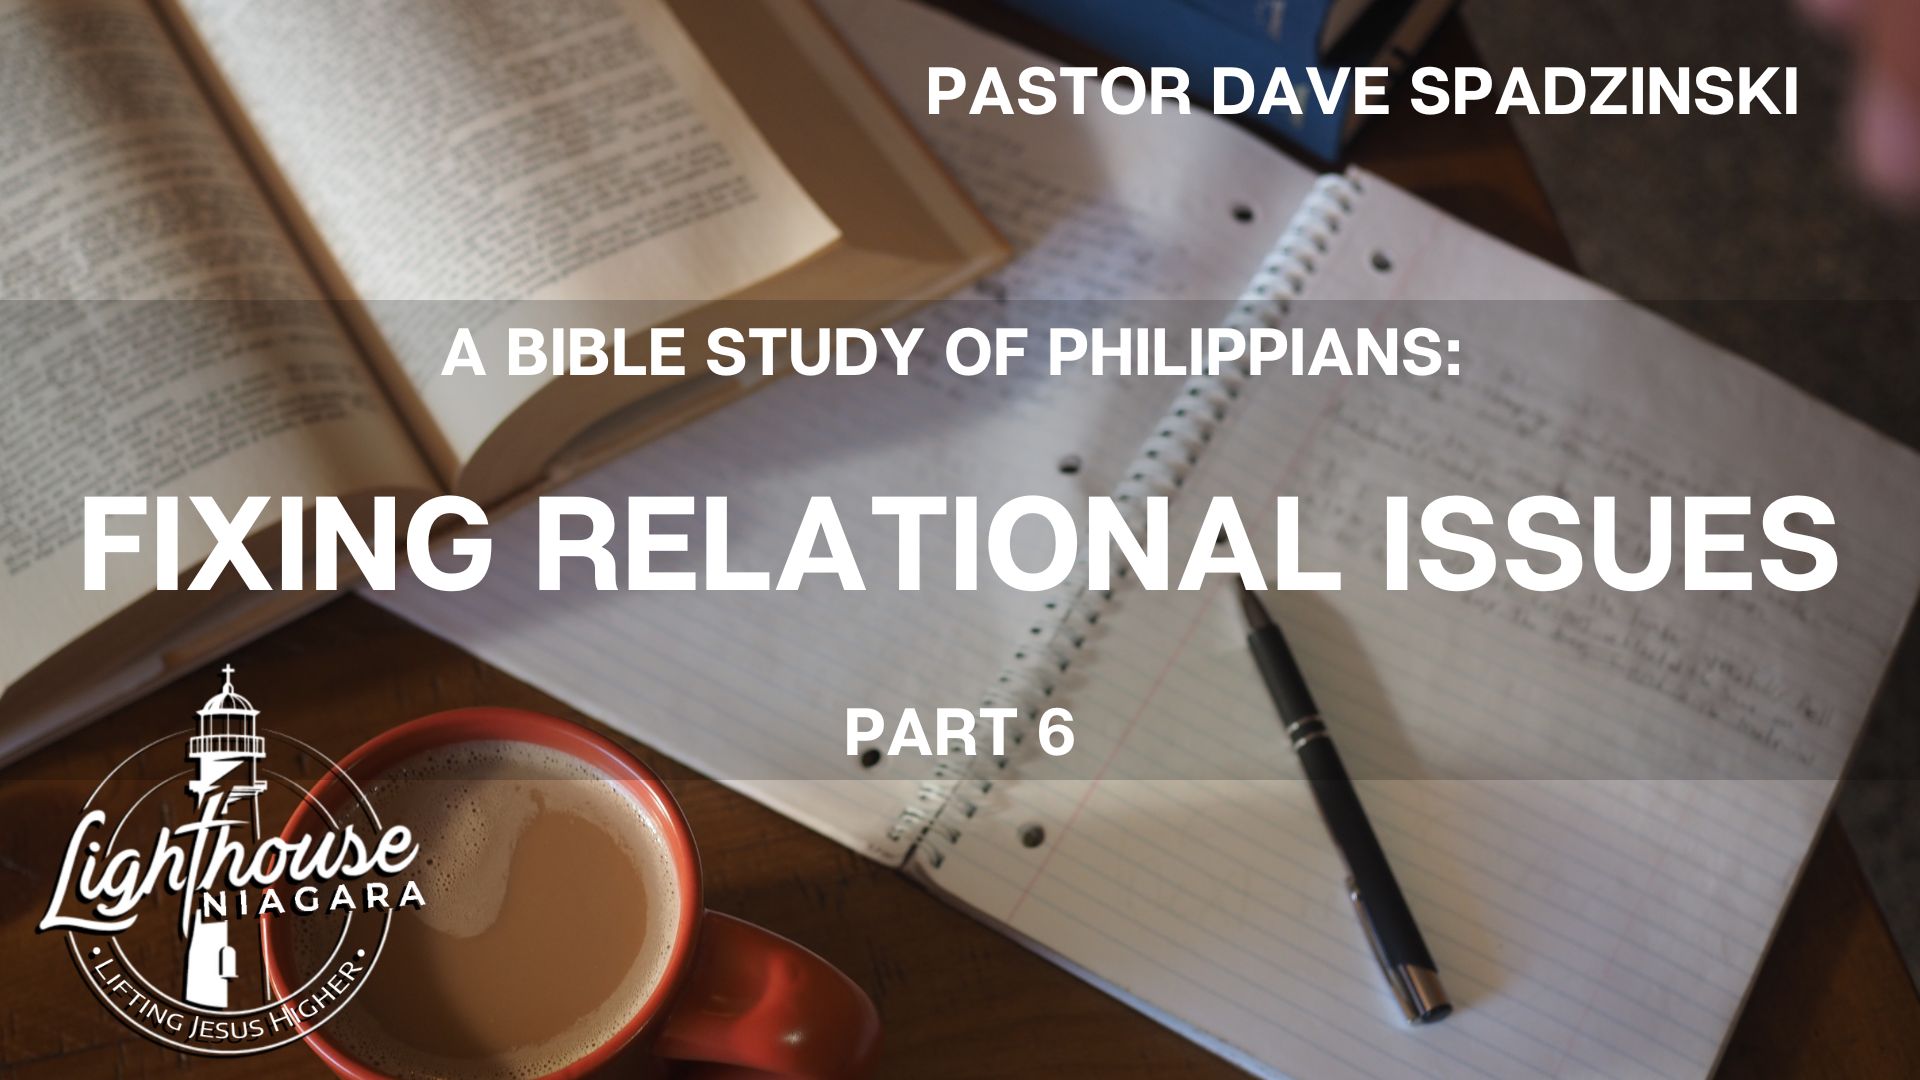 A Bible Study Of Philippians: Fixing Relational Issues - Pastor Dave Spadzinski